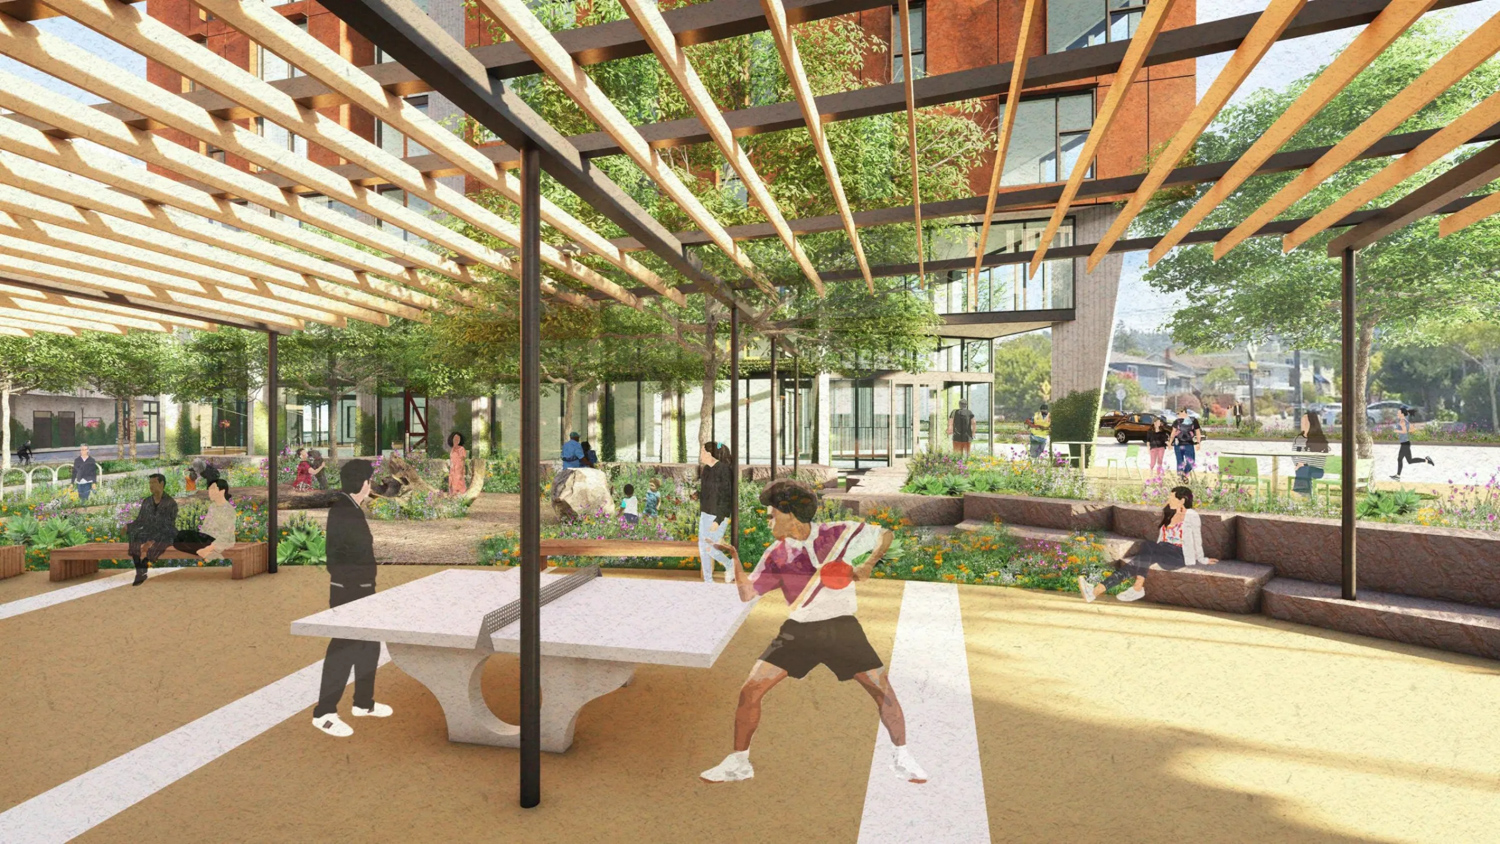 North Berkeley BART Redevelopment courtyard activity space, rendering by David Baker Architects